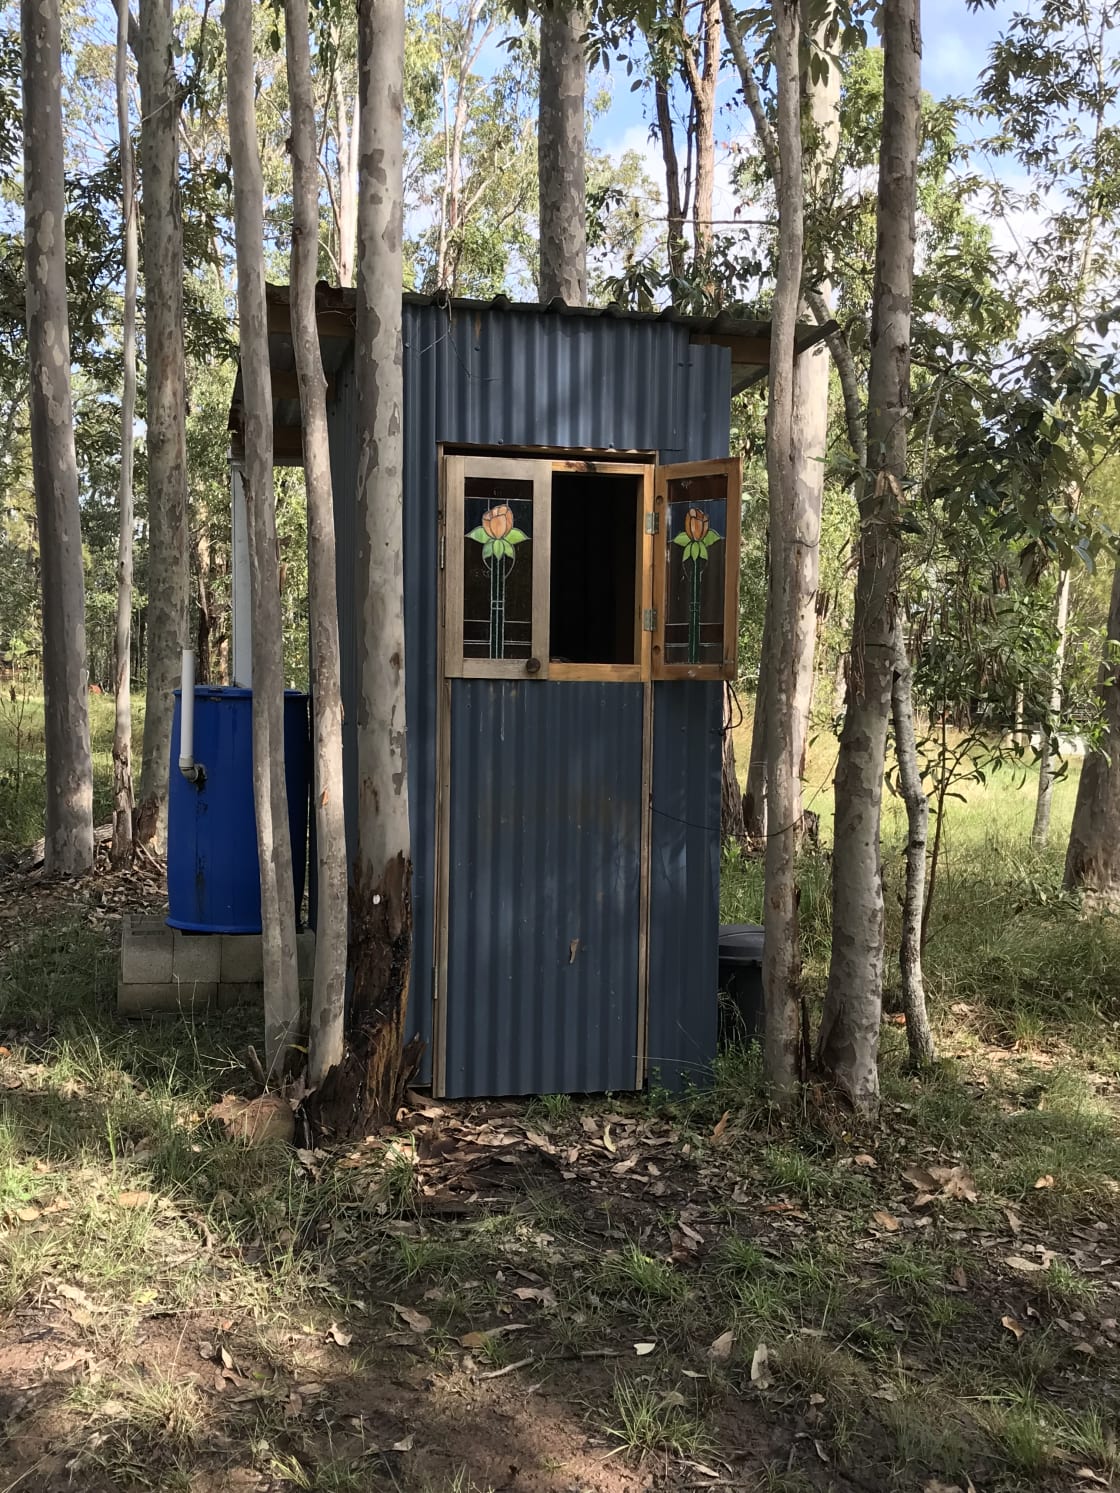 Private compostable toilet nestled amongst the gum trees.